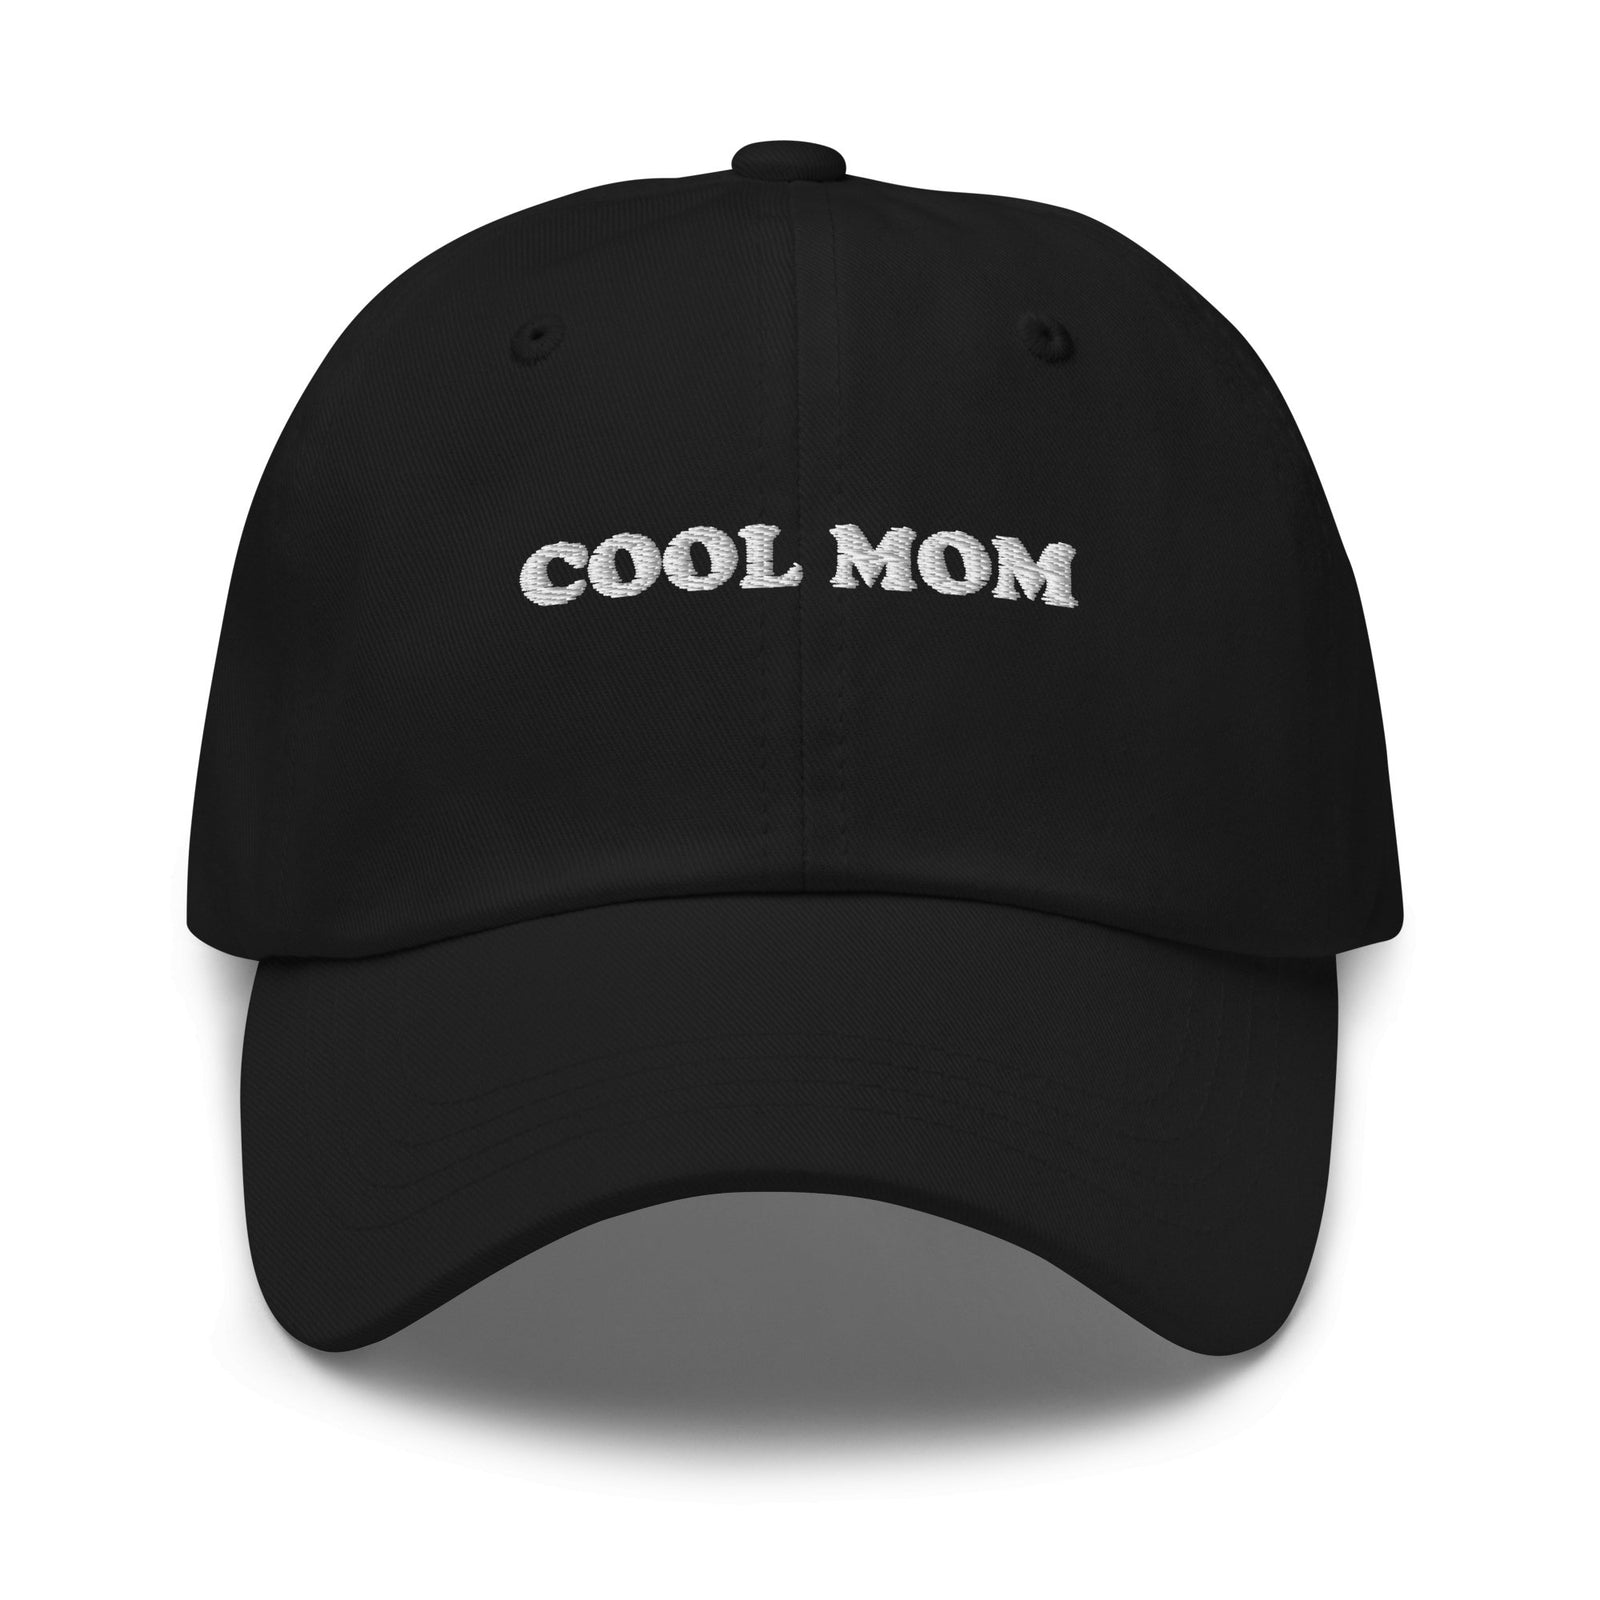 //cdn.shopify.com/s/files/1/0274/2488/2766/products/cool-mom-dad-hat-626162_5000x.jpg?v=1652422198 5000w,
    //cdn.shopify.com/s/files/1/0274/2488/2766/products/cool-mom-dad-hat-626162_4500x.jpg?v=1652422198 4500w,
    //cdn.shopify.com/s/files/1/0274/2488/2766/products/cool-mom-dad-hat-626162_4000x.jpg?v=1652422198 4000w,
    //cdn.shopify.com/s/files/1/0274/2488/2766/products/cool-mom-dad-hat-626162_3500x.jpg?v=1652422198 3500w,
    //cdn.shopify.com/s/files/1/0274/2488/2766/products/cool-mom-dad-hat-626162_3000x.jpg?v=1652422198 3000w,
    //cdn.shopify.com/s/files/1/0274/2488/2766/products/cool-mom-dad-hat-626162_2500x.jpg?v=1652422198 2500w,
    //cdn.shopify.com/s/files/1/0274/2488/2766/products/cool-mom-dad-hat-626162_2000x.jpg?v=1652422198 2000w,
    //cdn.shopify.com/s/files/1/0274/2488/2766/products/cool-mom-dad-hat-626162_1800x.jpg?v=1652422198 1800w,
    //cdn.shopify.com/s/files/1/0274/2488/2766/products/cool-mom-dad-hat-626162_1600x.jpg?v=1652422198 1600w,
    //cdn.shopify.com/s/files/1/0274/2488/2766/products/cool-mom-dad-hat-626162_1400x.jpg?v=1652422198 1400w,
    //cdn.shopify.com/s/files/1/0274/2488/2766/products/cool-mom-dad-hat-626162_1200x.jpg?v=1652422198 1200w,
    //cdn.shopify.com/s/files/1/0274/2488/2766/products/cool-mom-dad-hat-626162_1000x.jpg?v=1652422198 1000w,
    //cdn.shopify.com/s/files/1/0274/2488/2766/products/cool-mom-dad-hat-626162_800x.jpg?v=1652422198 800w,
    //cdn.shopify.com/s/files/1/0274/2488/2766/products/cool-mom-dad-hat-626162_600x.jpg?v=1652422198 600w,
    //cdn.shopify.com/s/files/1/0274/2488/2766/products/cool-mom-dad-hat-626162_400x.jpg?v=1652422198 400w,
    //cdn.shopify.com/s/files/1/0274/2488/2766/products/cool-mom-dad-hat-626162_200x.jpg?v=1652422198 200w